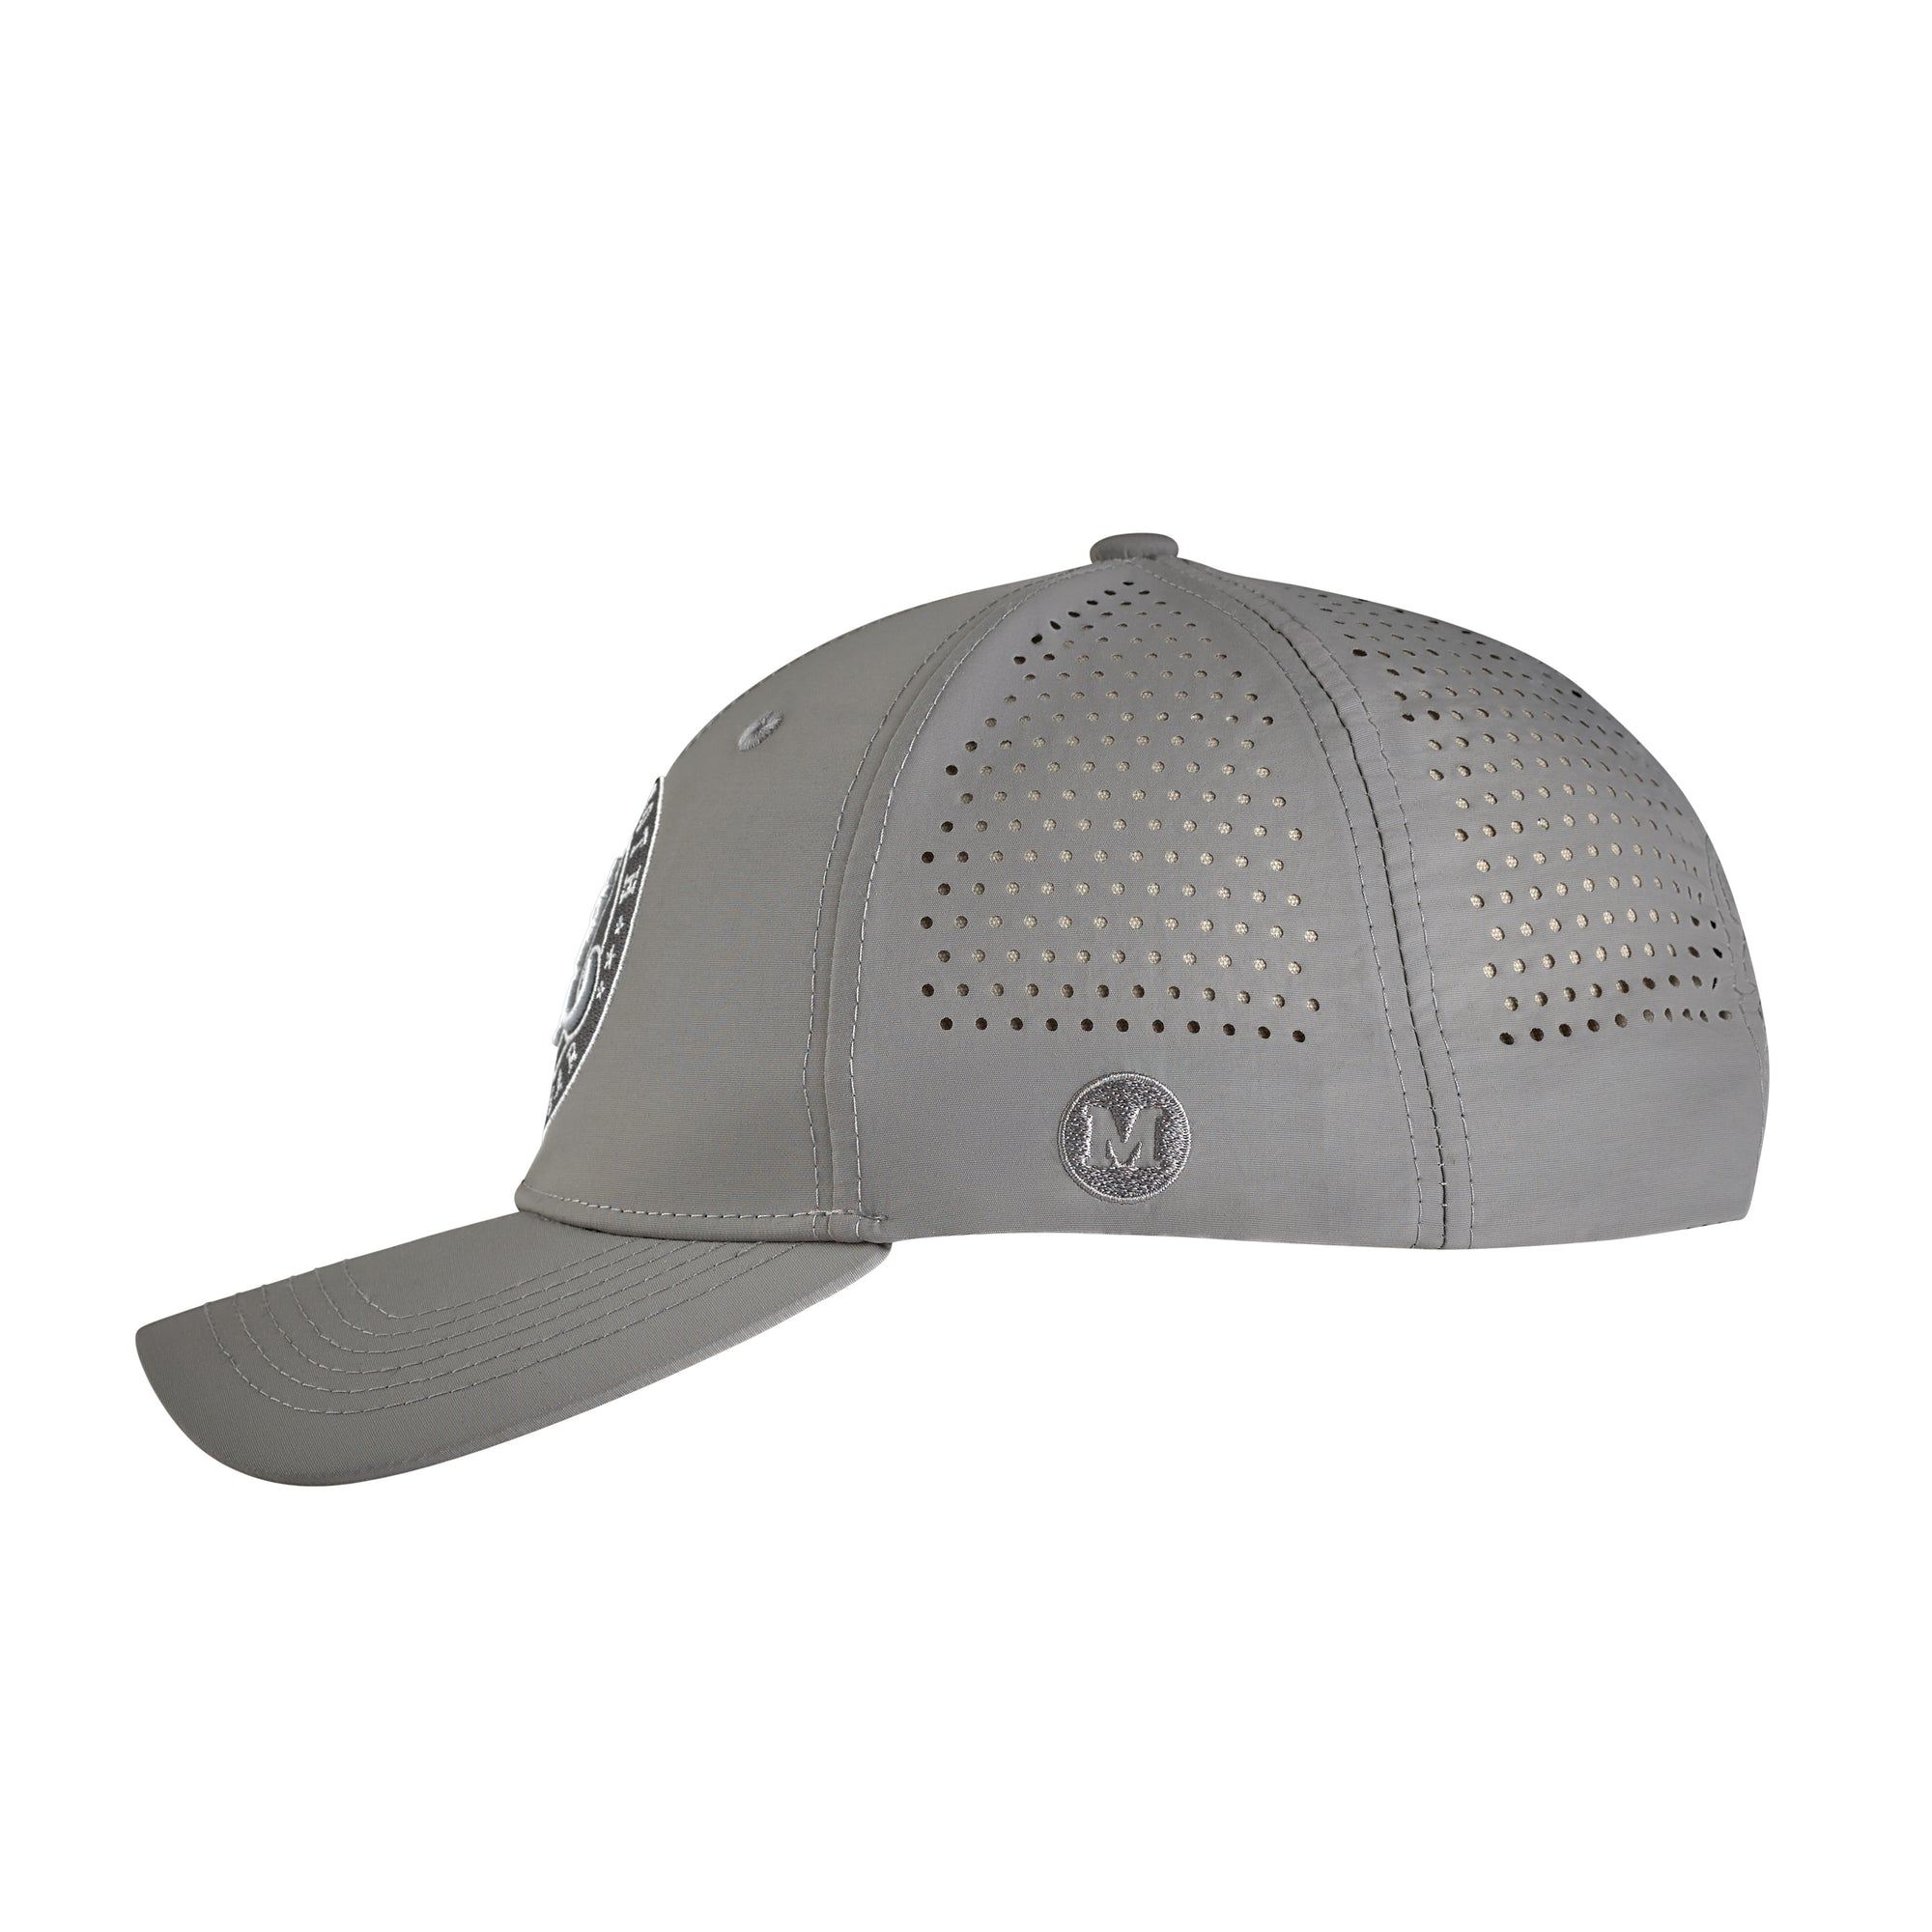  CLASSIC PERFORMANCE SNAPBACK - GREY - Side View